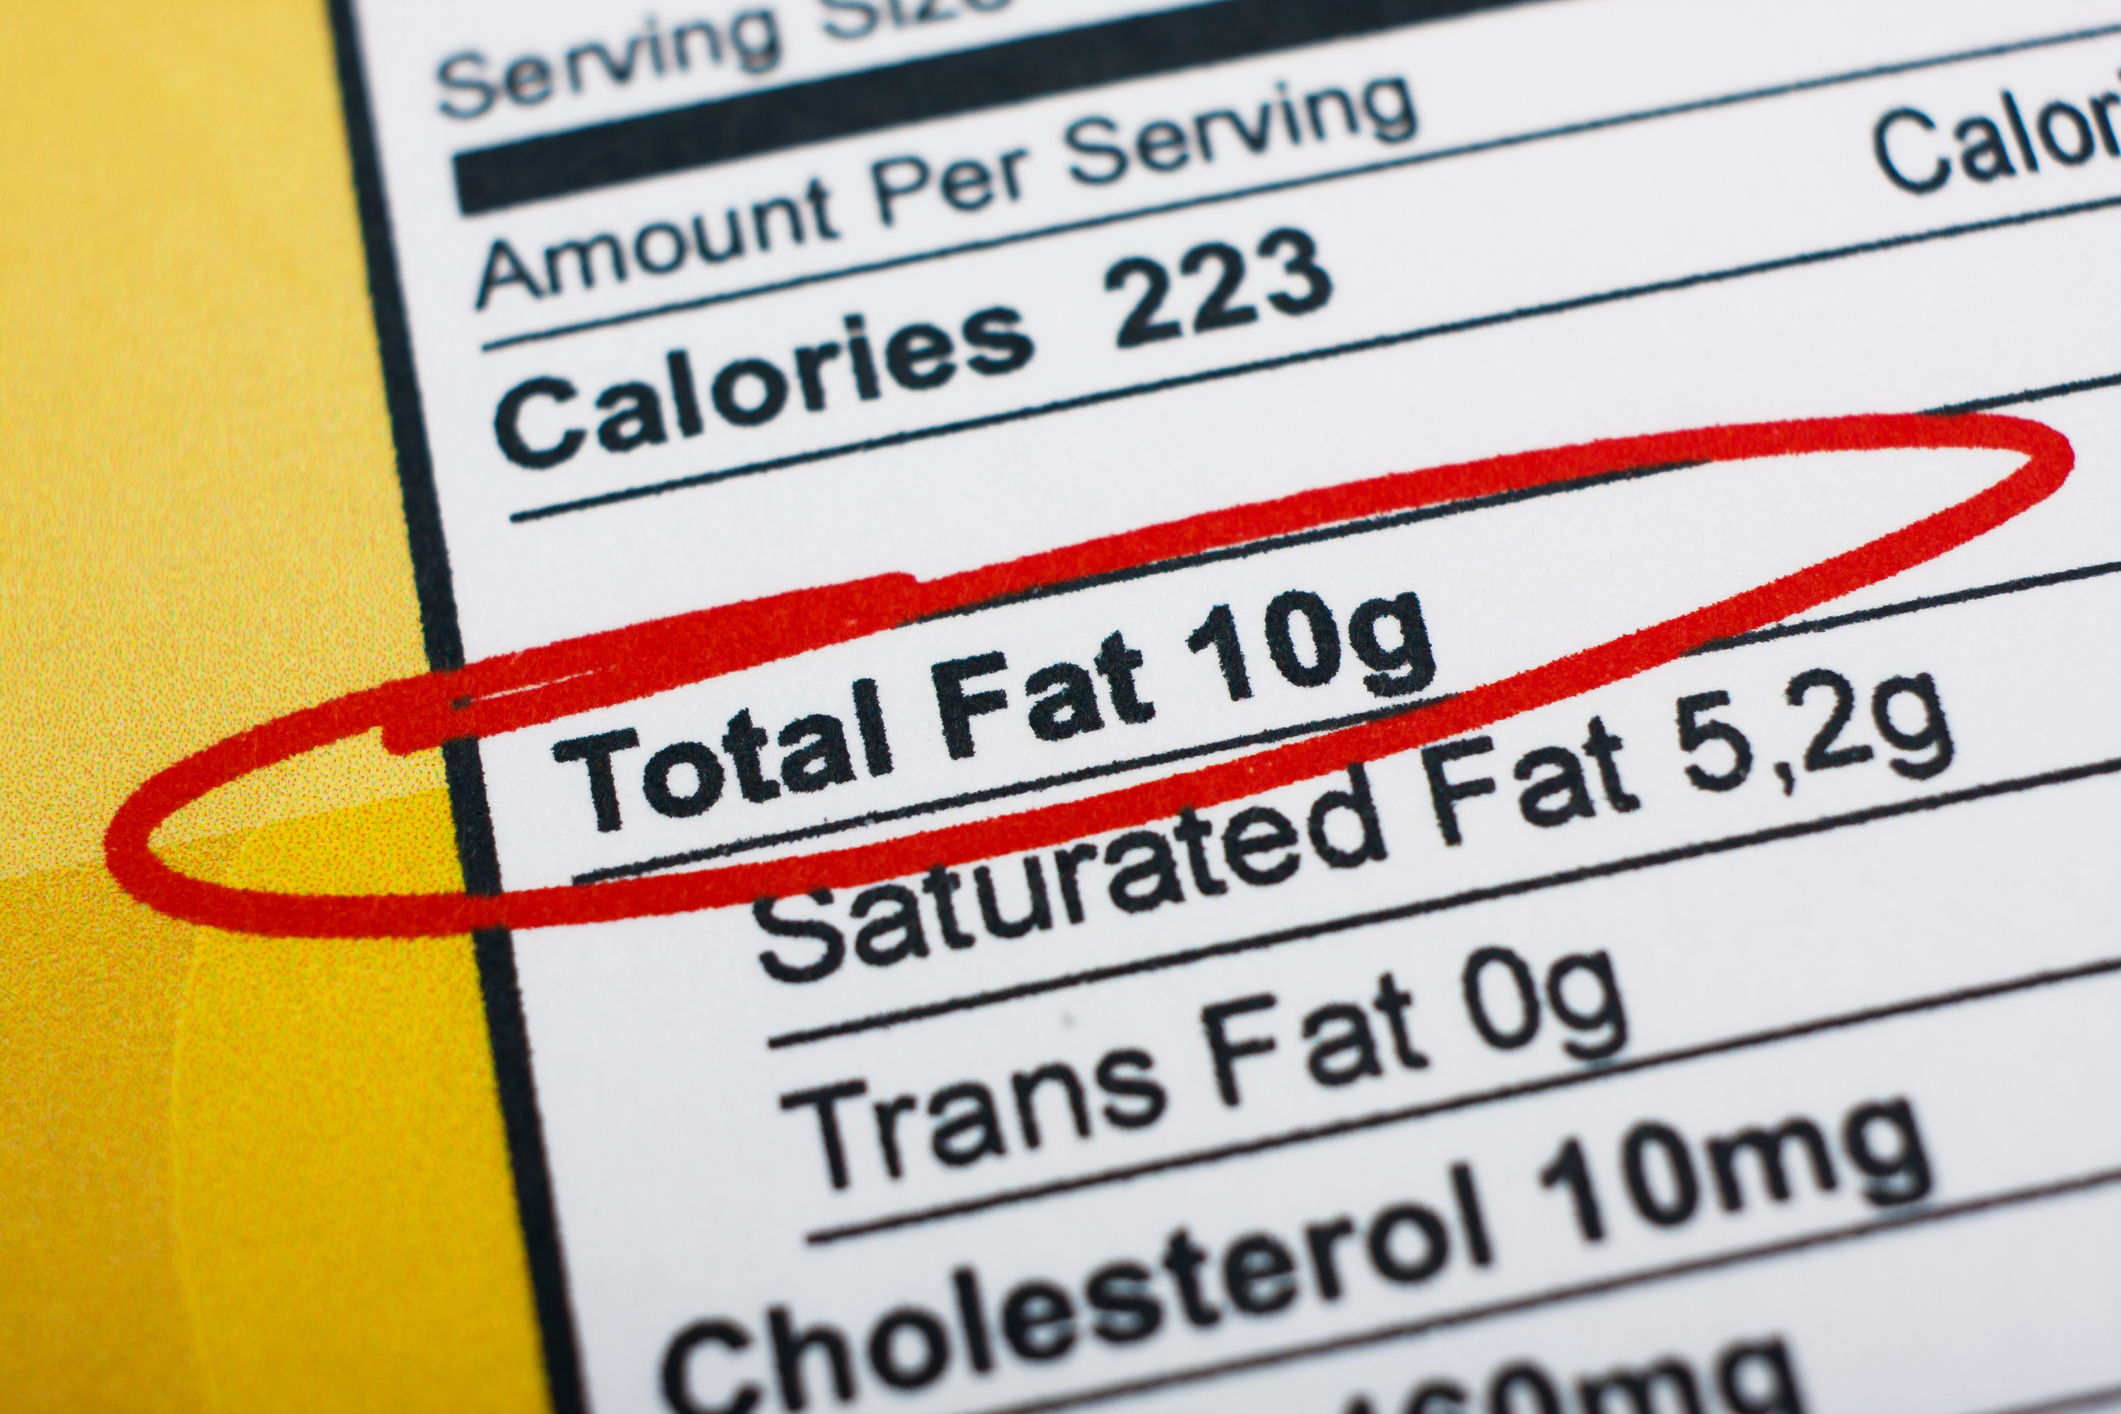 Why giving up saturated fats can lead to heart trouble